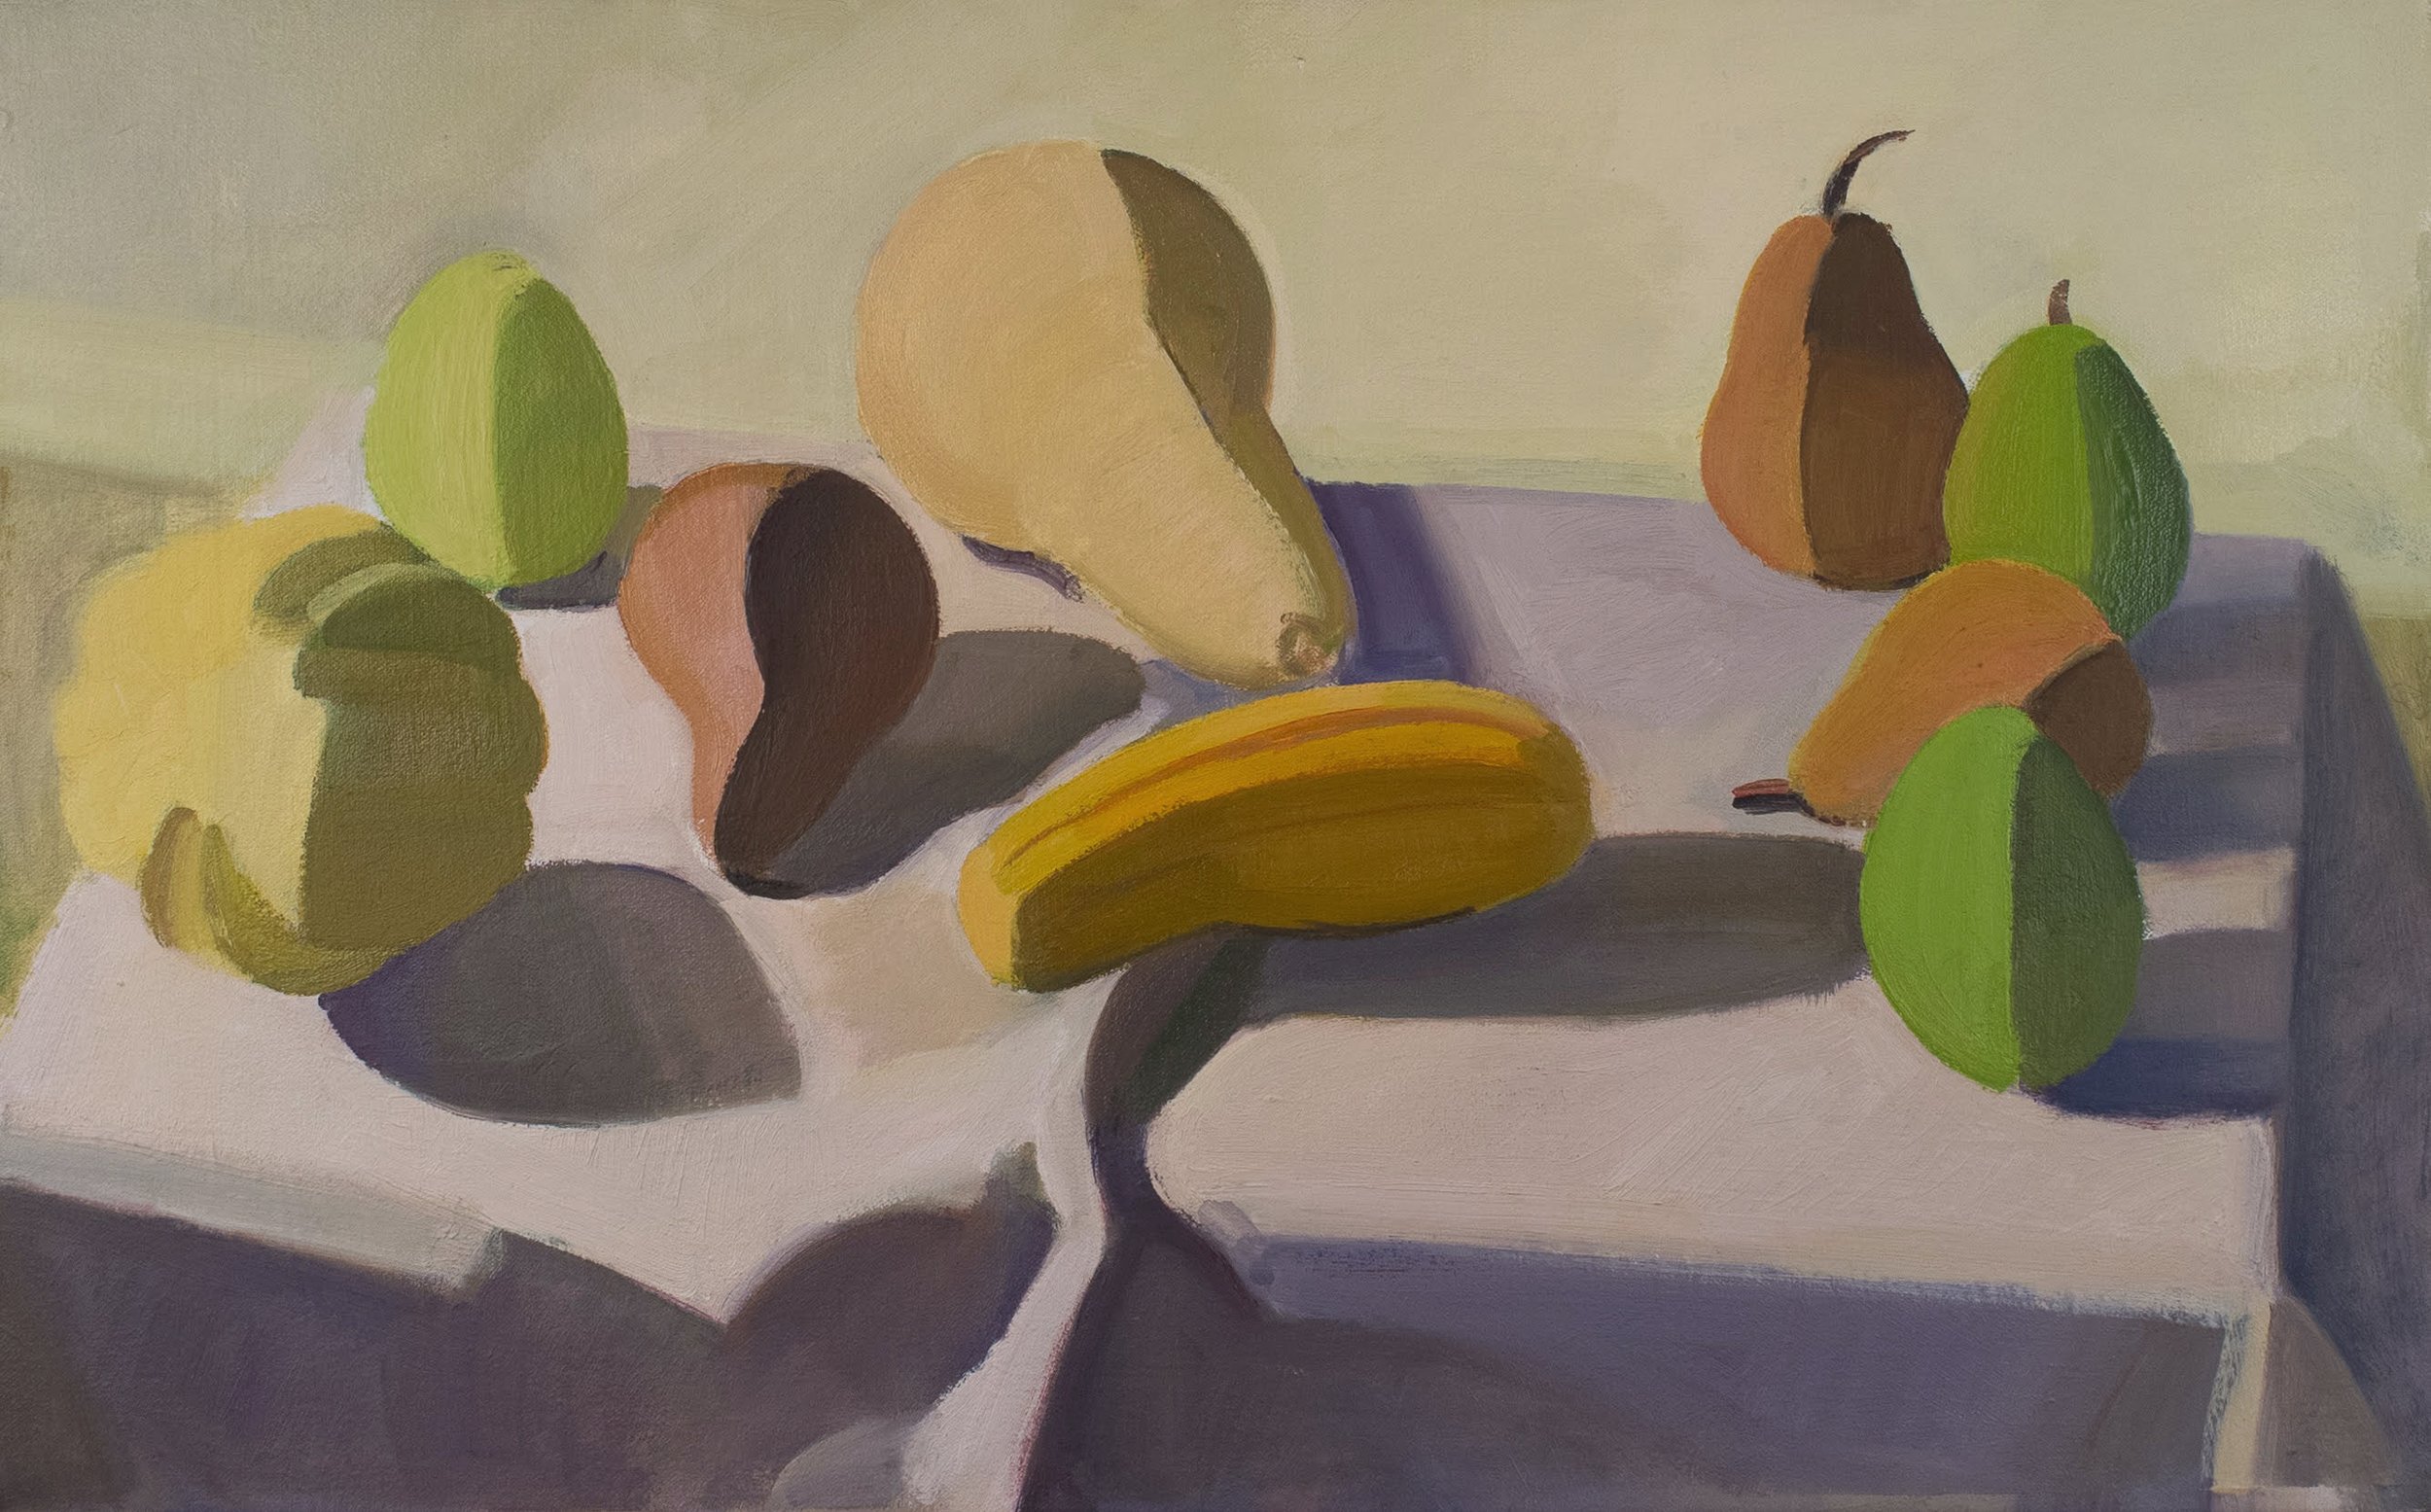   Squash and Pears, Blush Cloth , 1993, oil/canvas, 15 x 24 in. (Private collection) 